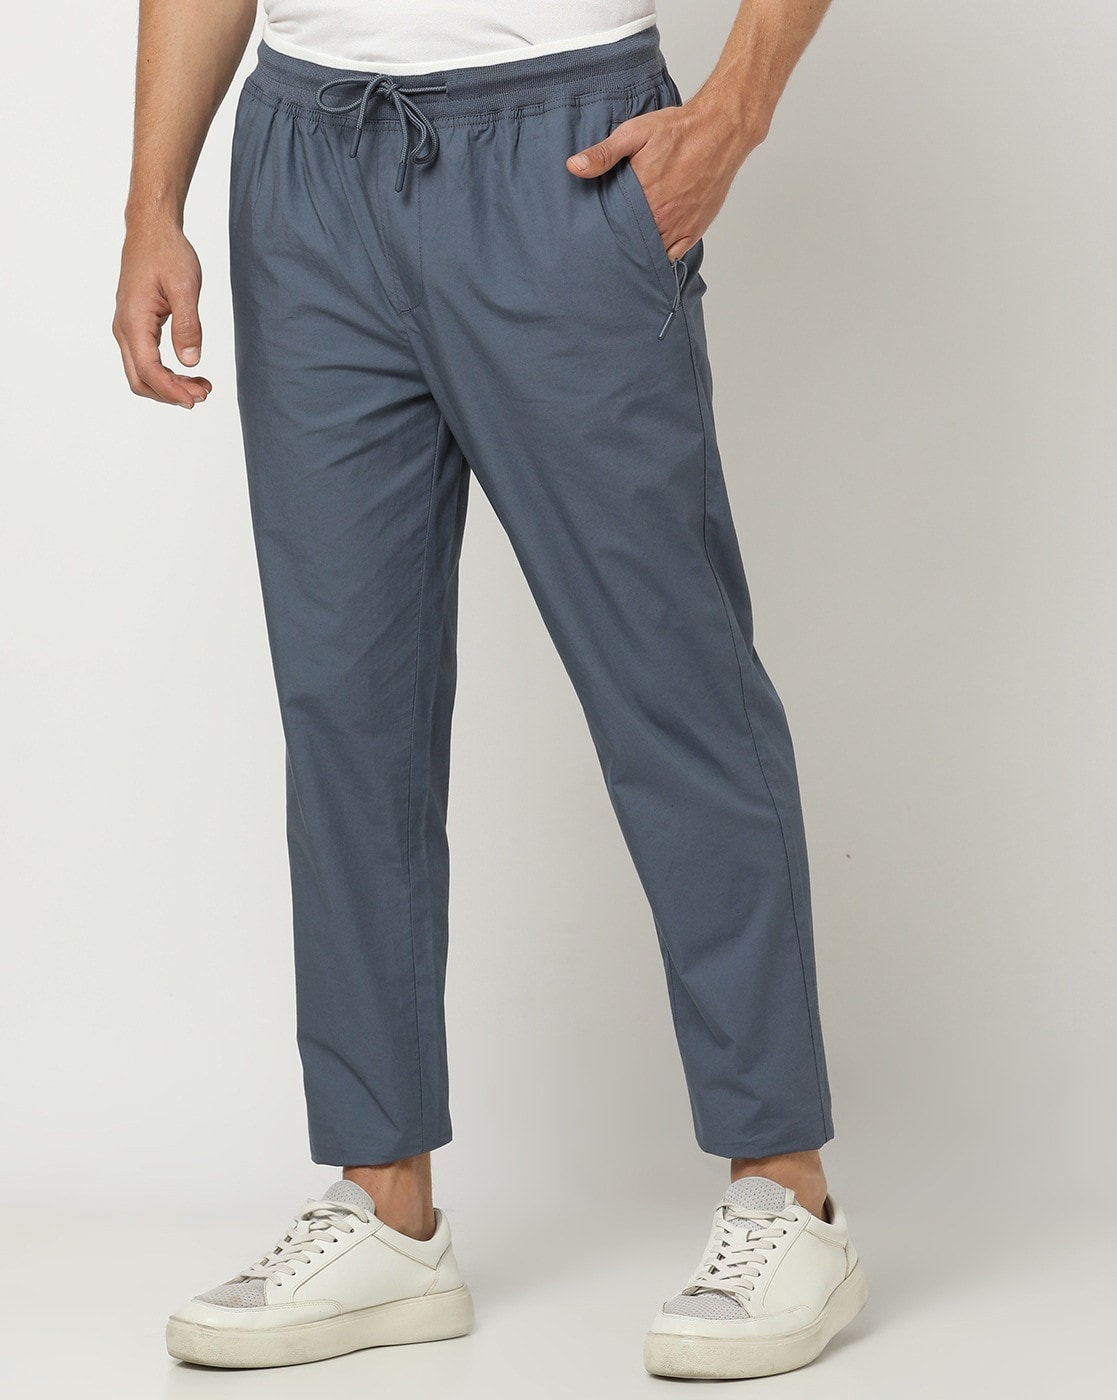 Tommy John Second Skin Modal Knit Lounge Pants & Reviews | Bare Necessities  (Style 1000781)